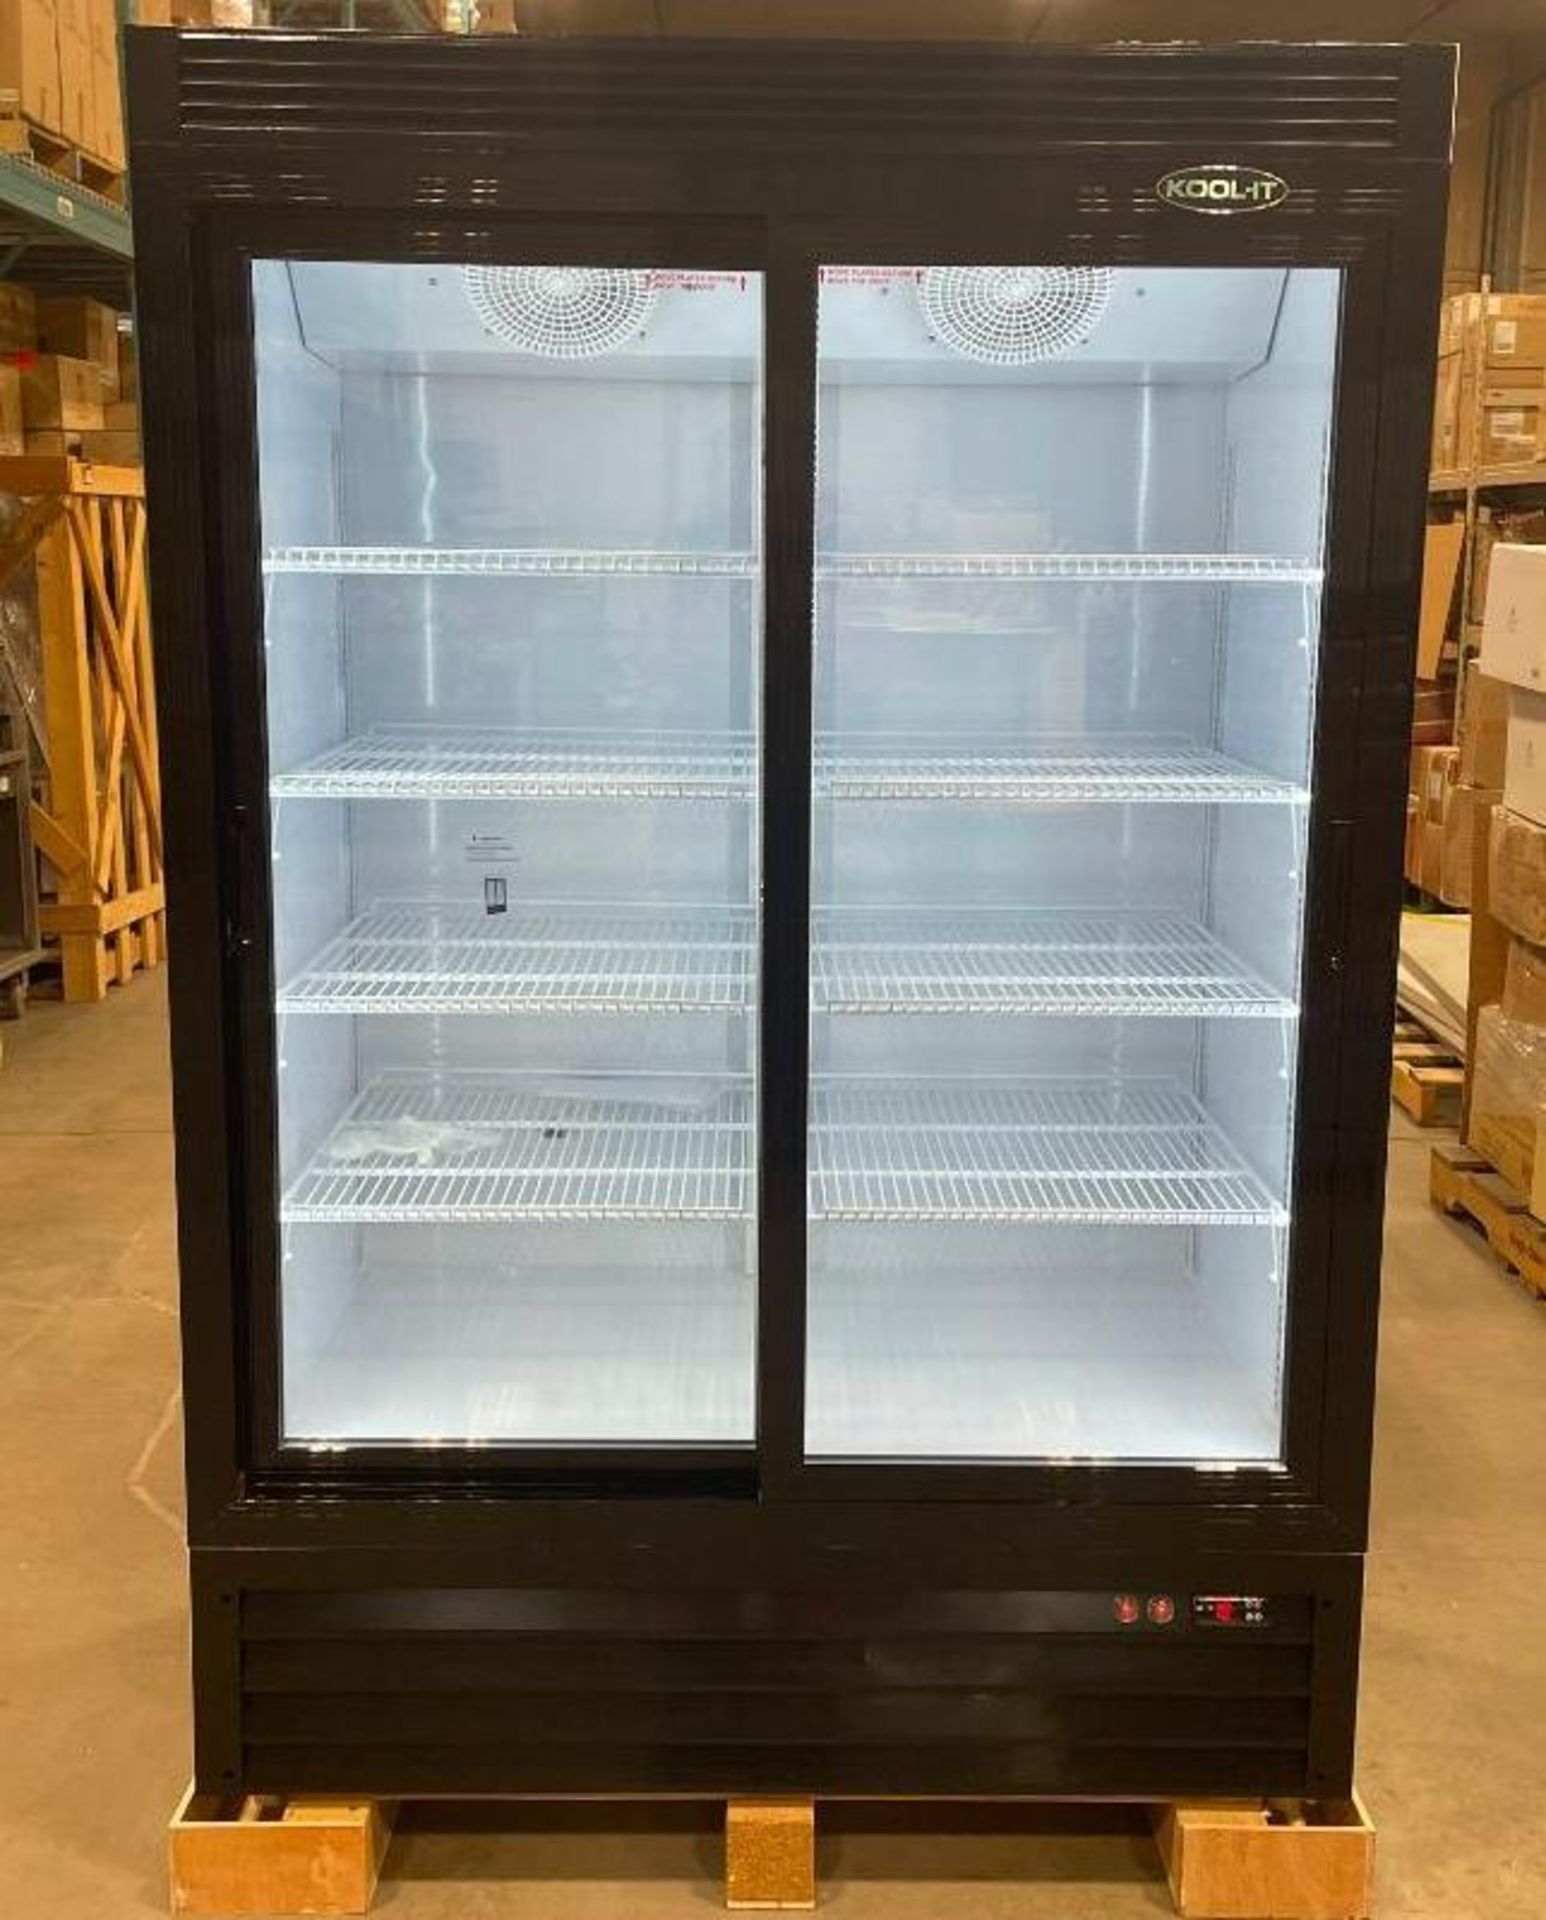 DOUBLE SLIDING GLASS DOOR COOLER, 33.5 CU. FT, LED DISPLAY - NEW - Image 12 of 12